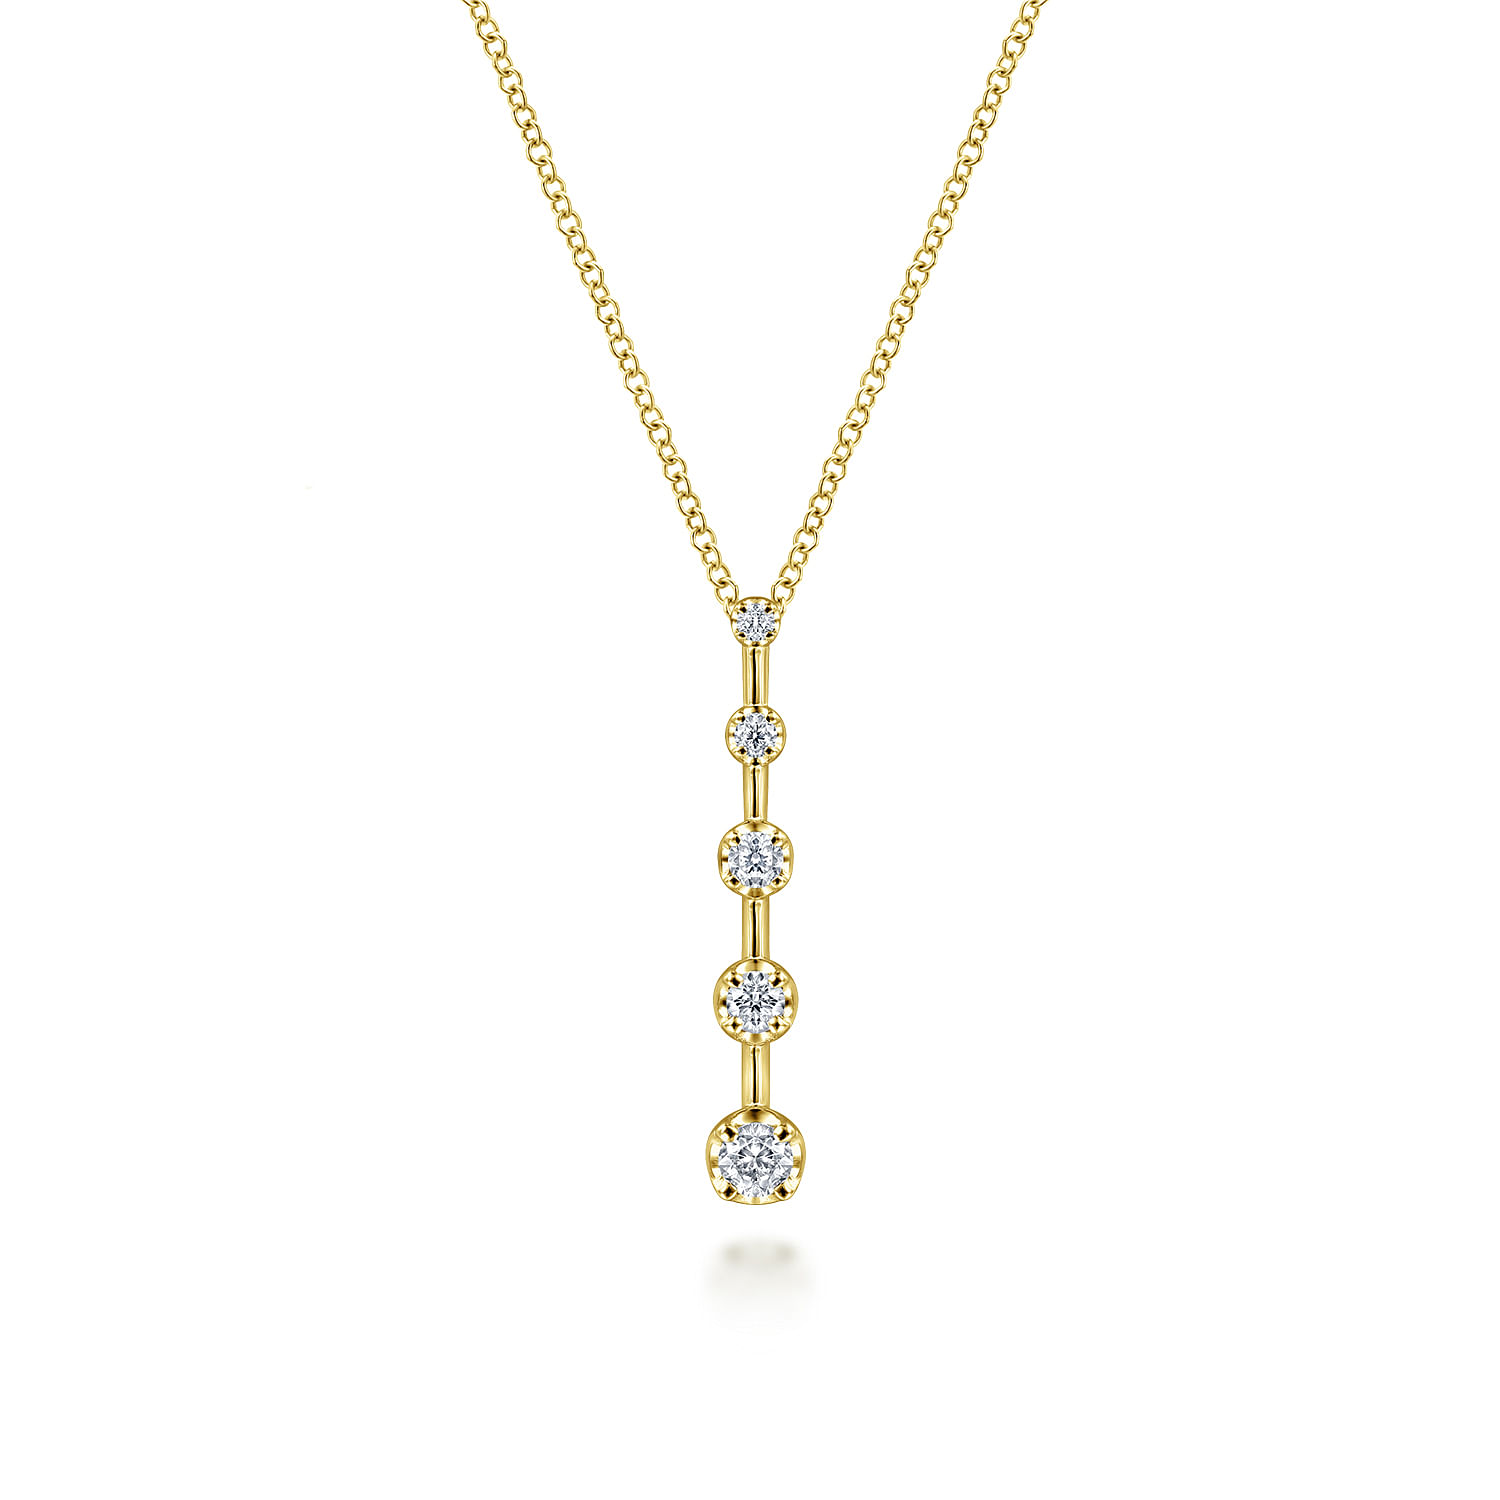 14K Yellow Gold Bar Pendant Necklace with Diamond Stations